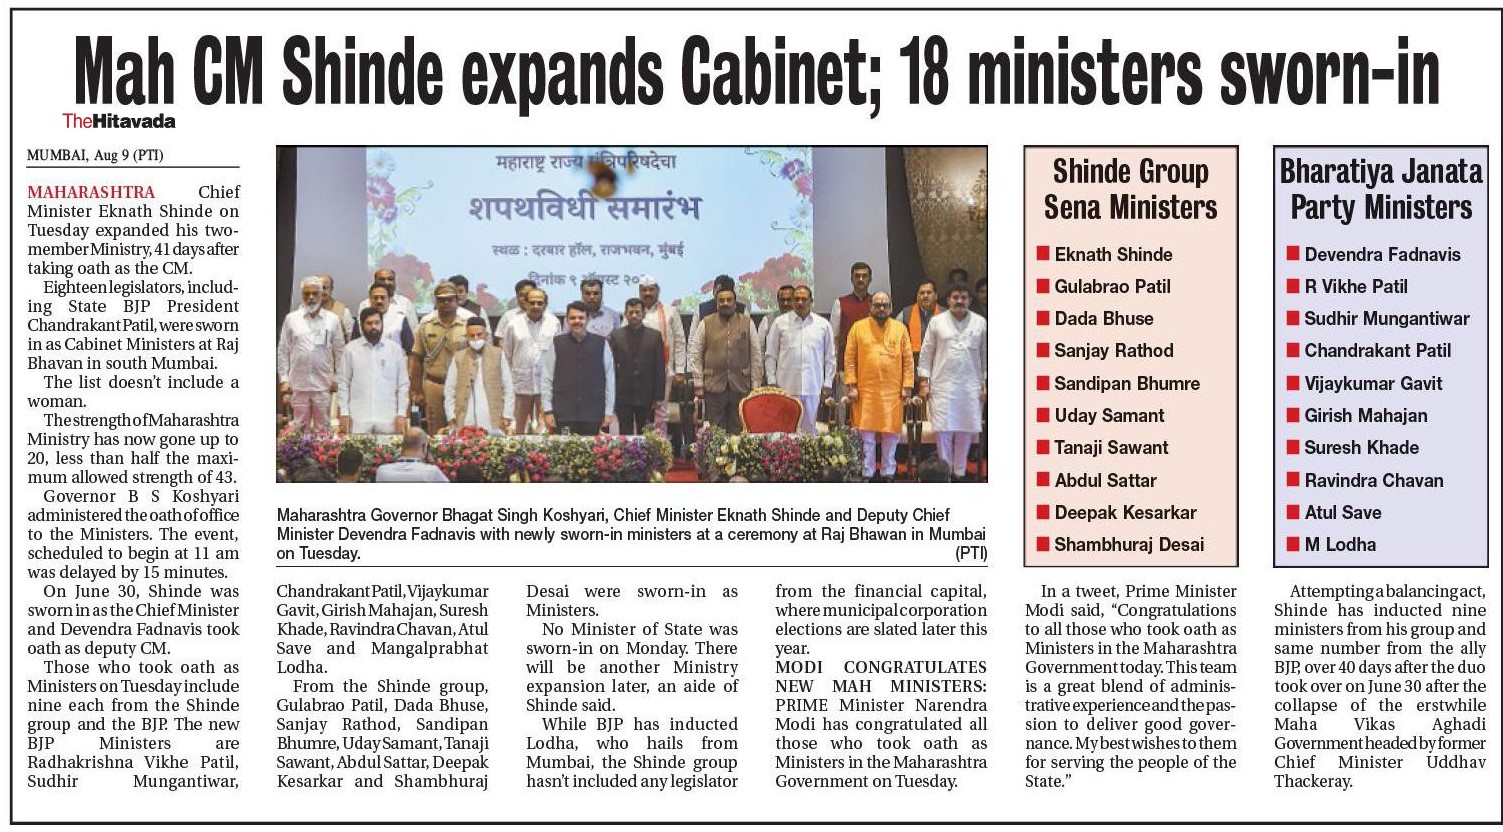 Mah CM Shinde expands Cabinet, 18 ministers sworn-in